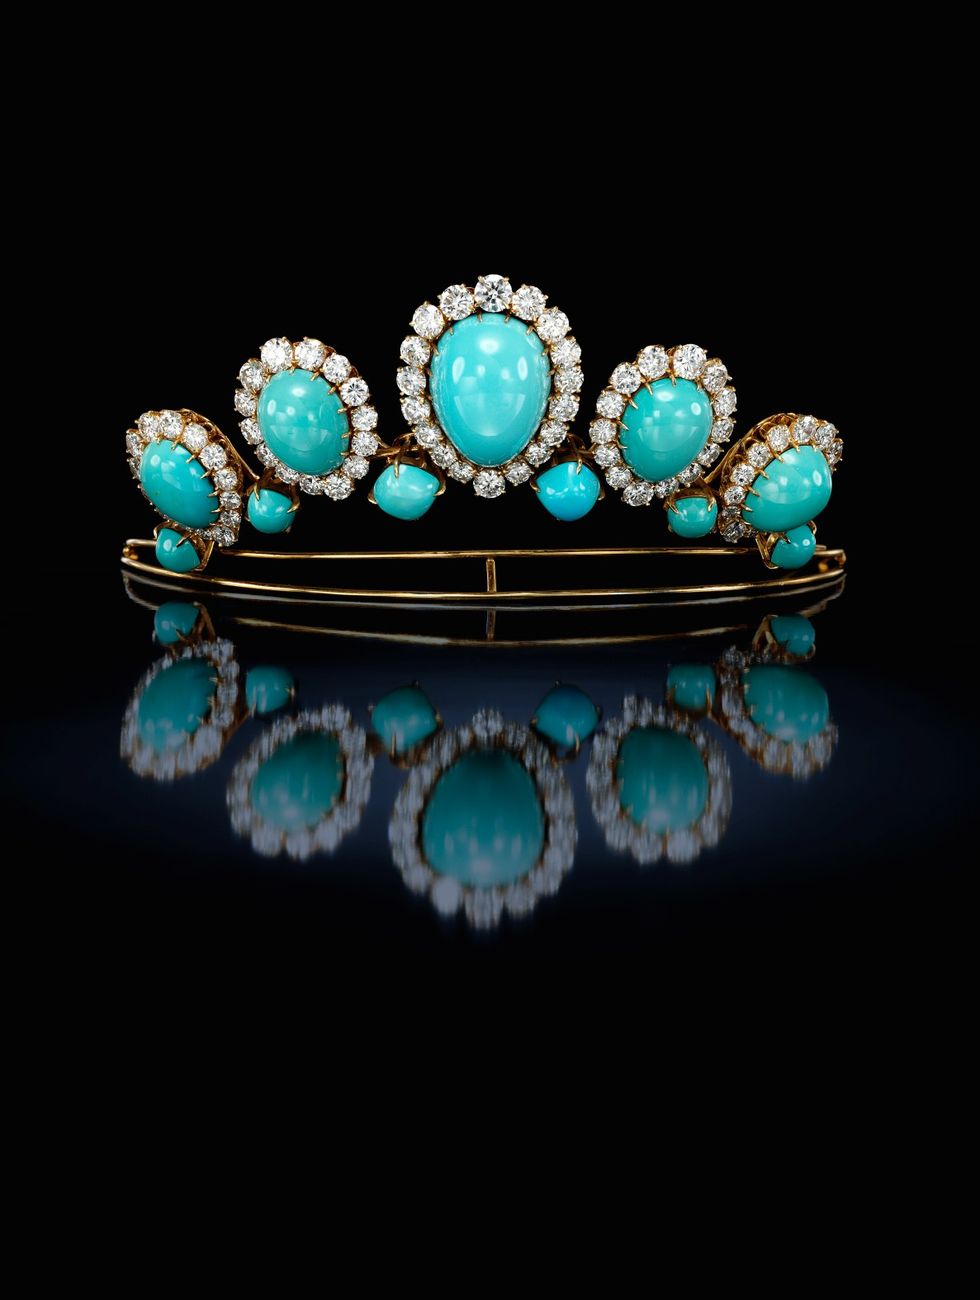 a turquoise tiara which will be on display at sotheby's this summer for the platinum jubilee